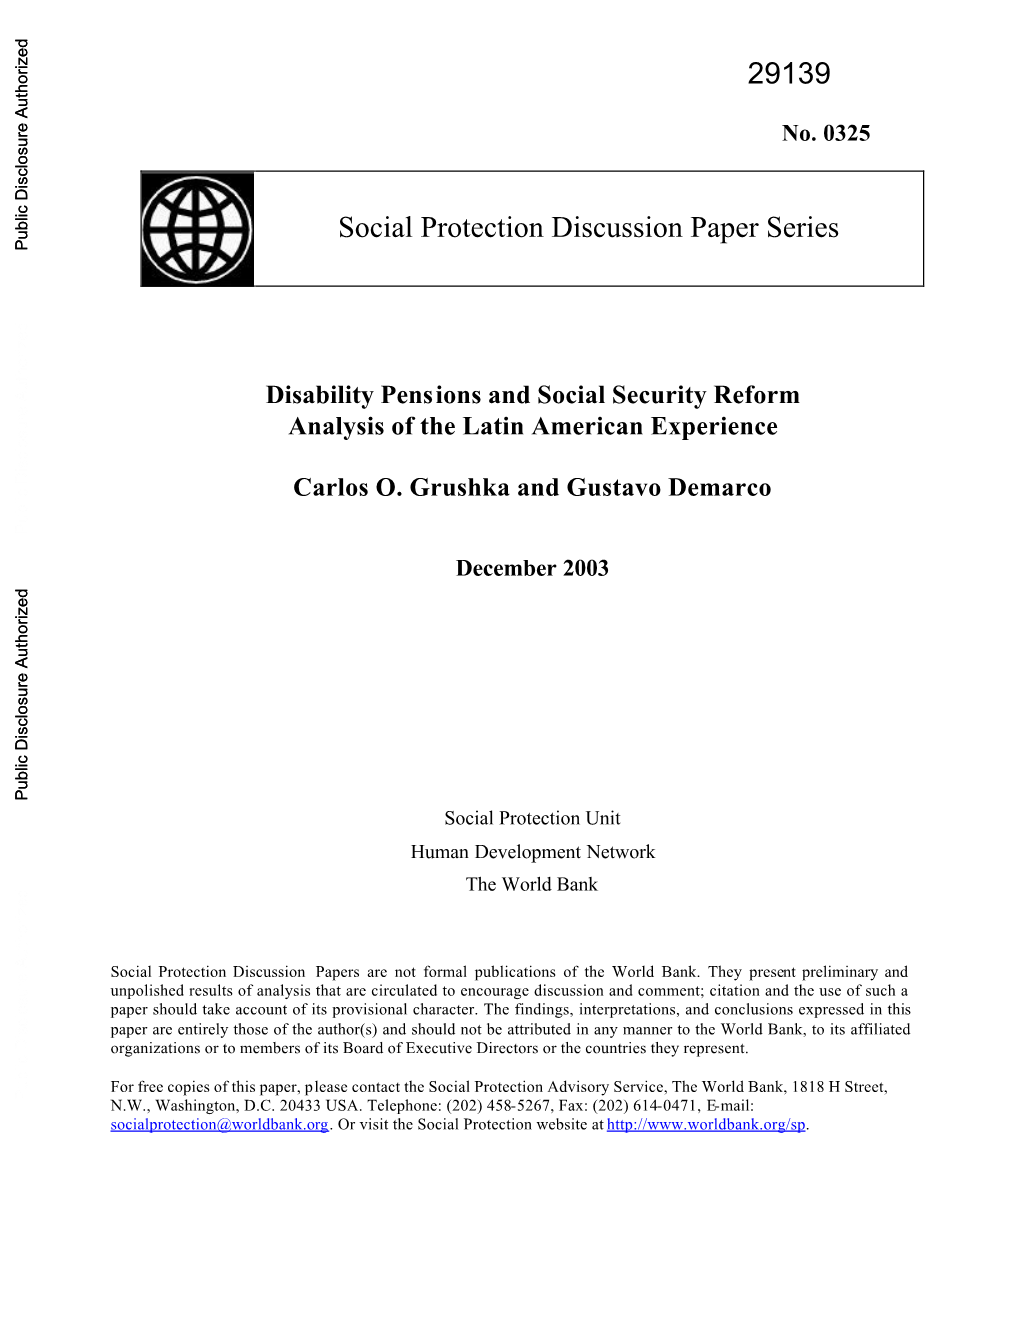 Disability Pensions and Social Security Reform Analysis of the Latin American Experience